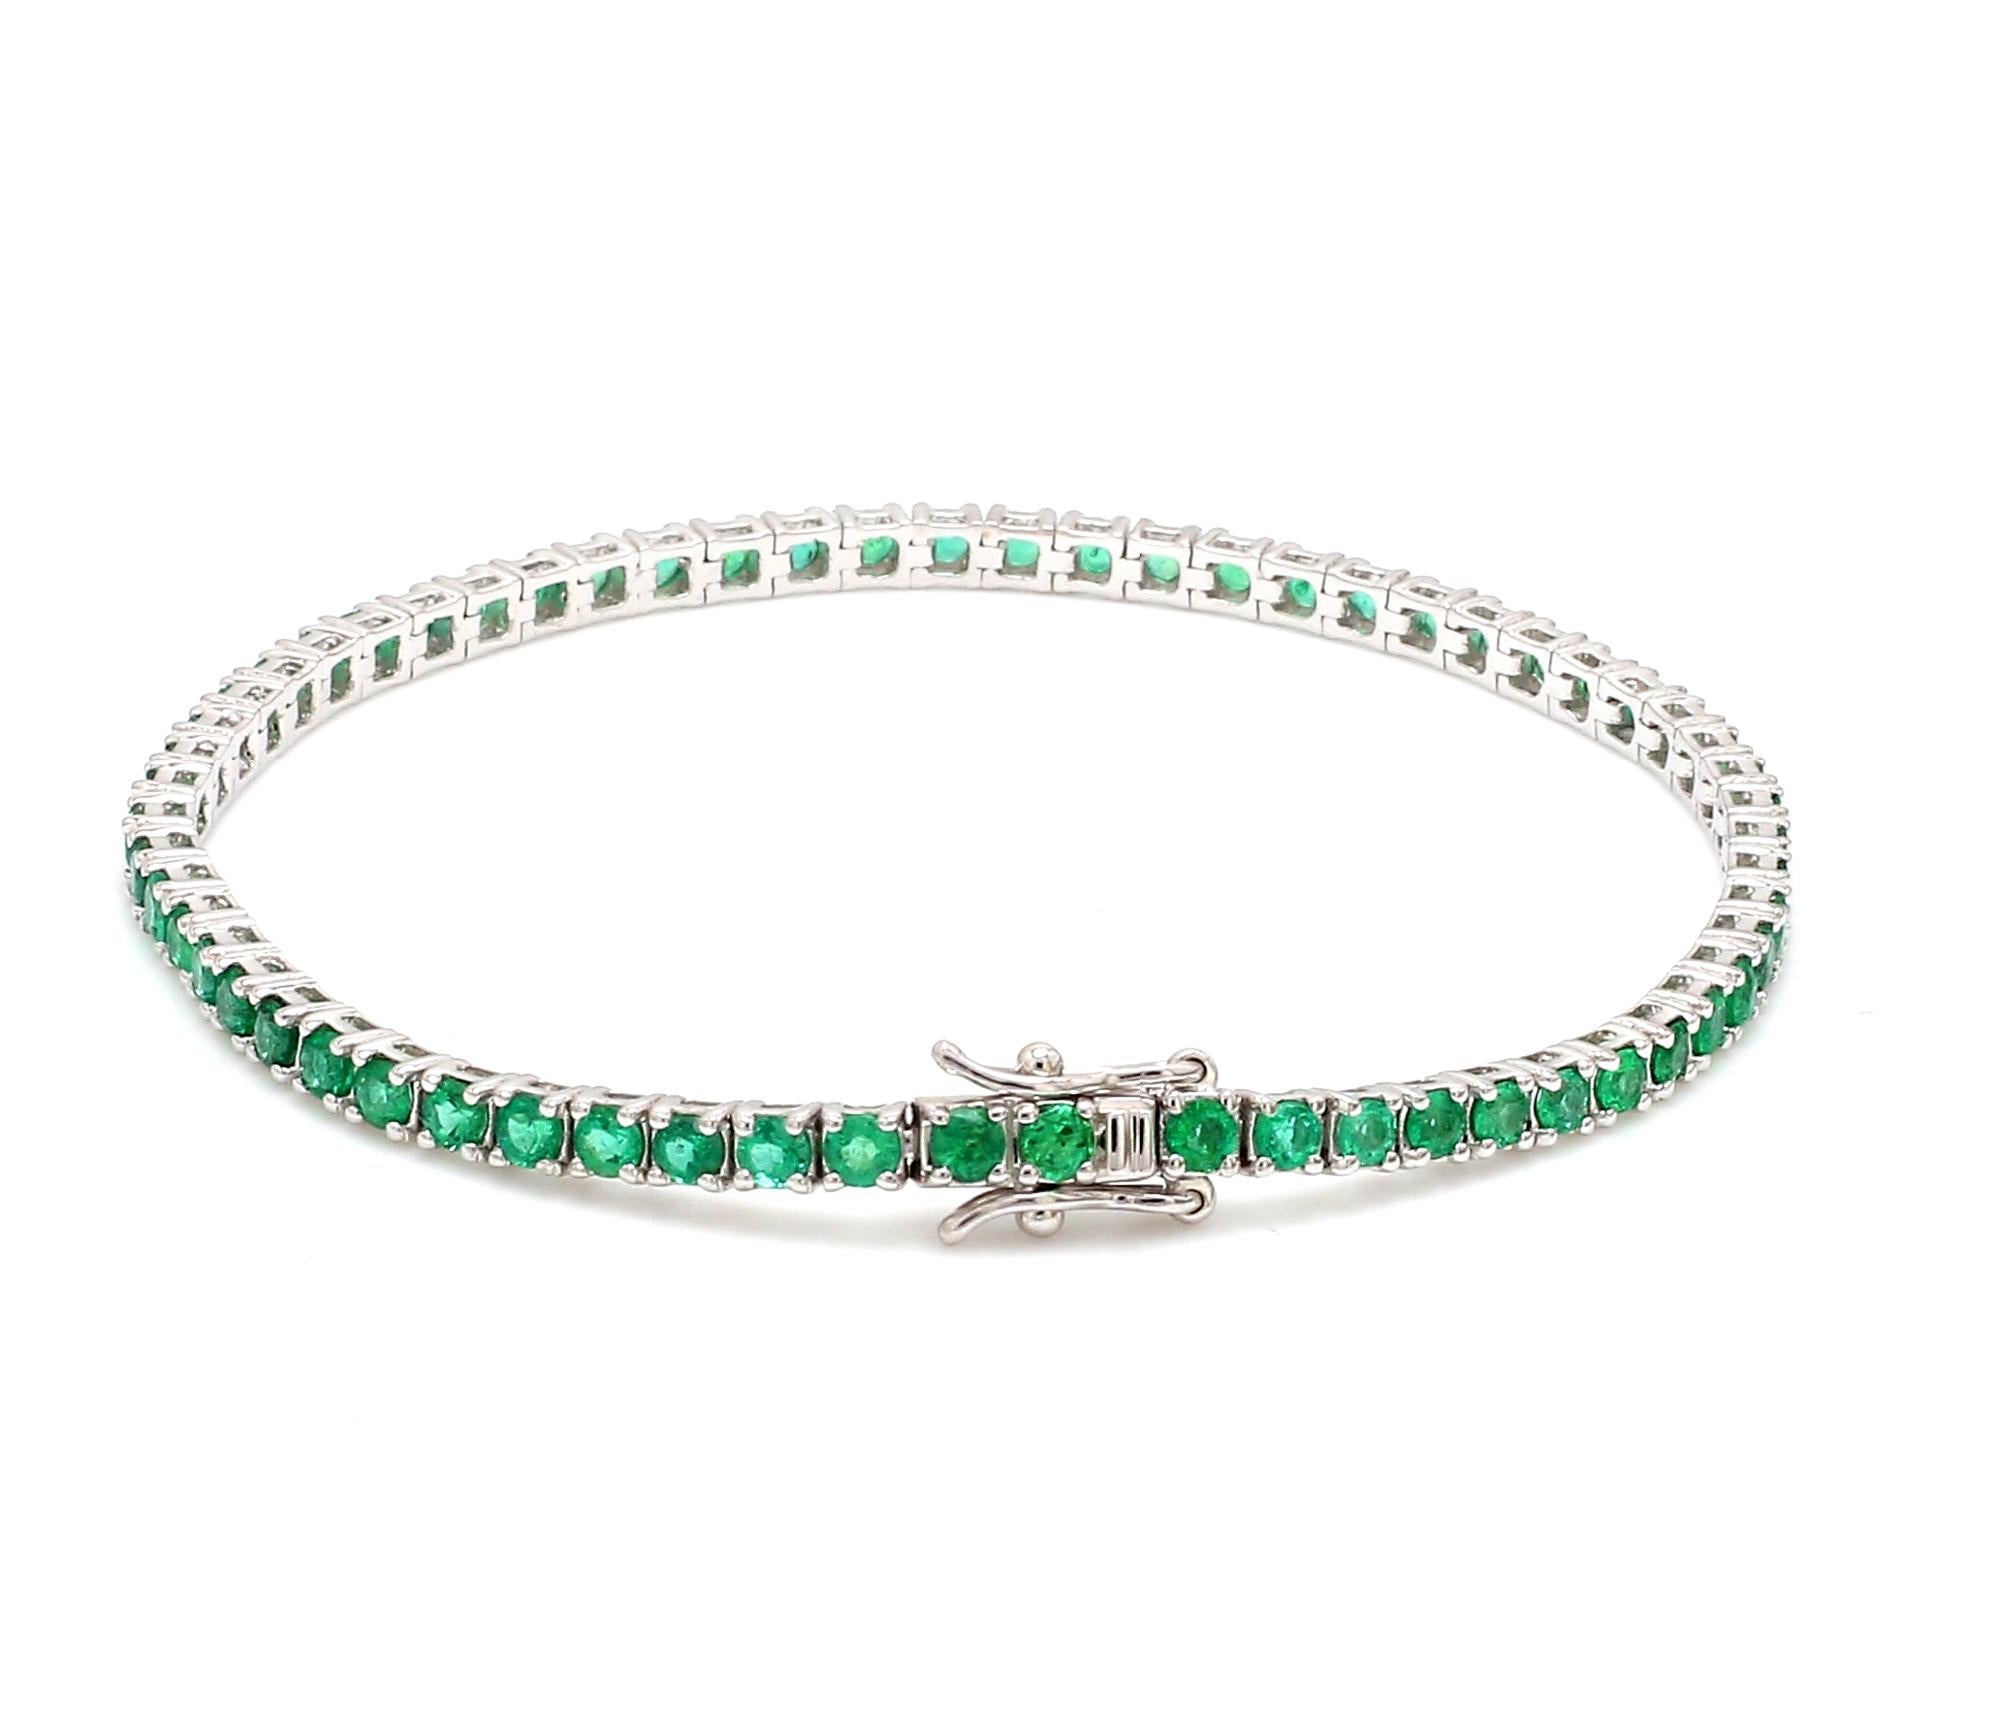 Item Code :- CN-24535
Gross Weight :- 9.76 gm
18k White Gold Weight :- 9.15 gm
Emerald Weight :- 3.05 carat
Bracelet Length :- 7 Inches Long
✦ Sizing
.....................
We can adjust most items to fit your sizing preferences. Most items can be